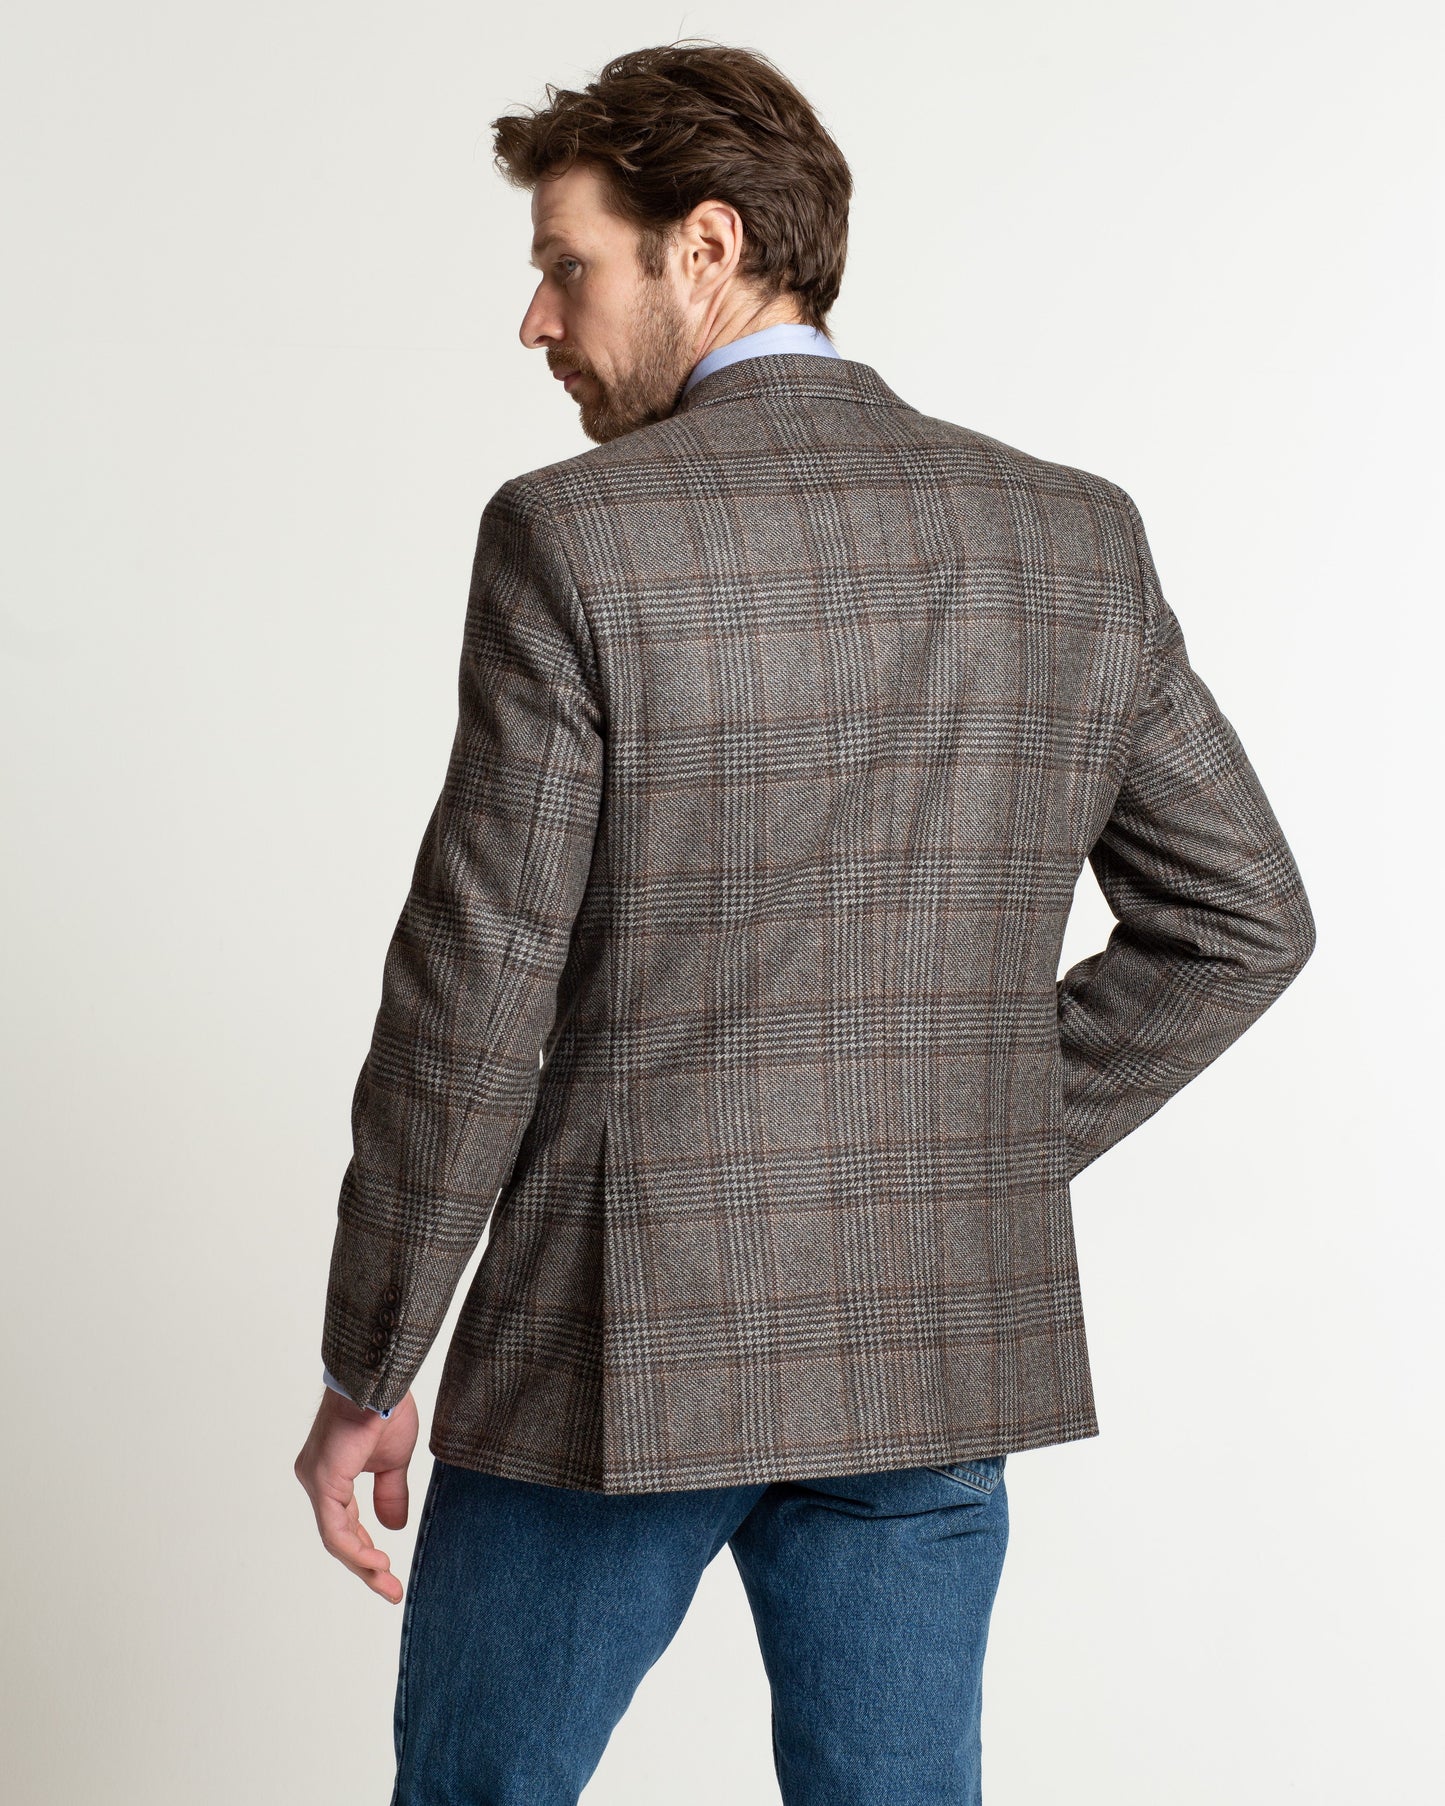 
                  
                    Toby Luper Signature Collection Brown & Grey Glen Check
                  
                